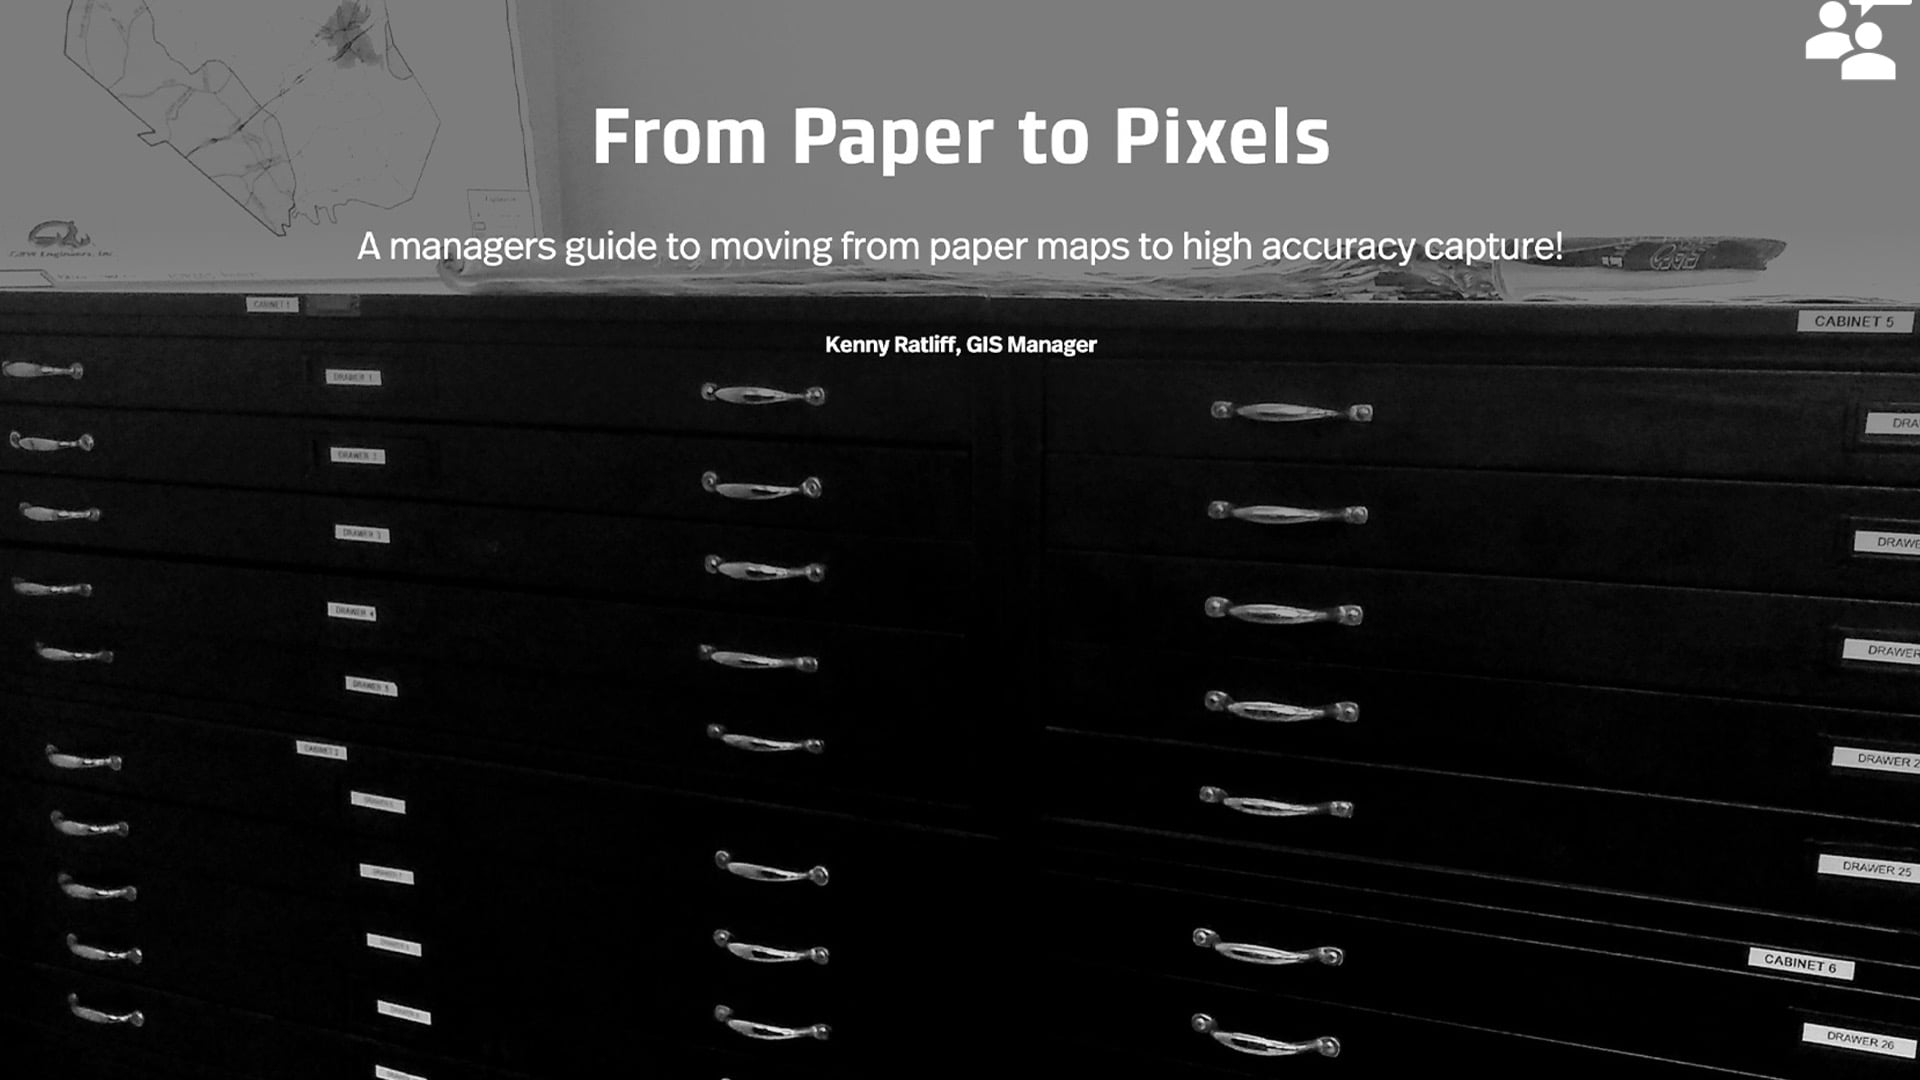 NRWA Eos Webinar: From Paper to Pixels